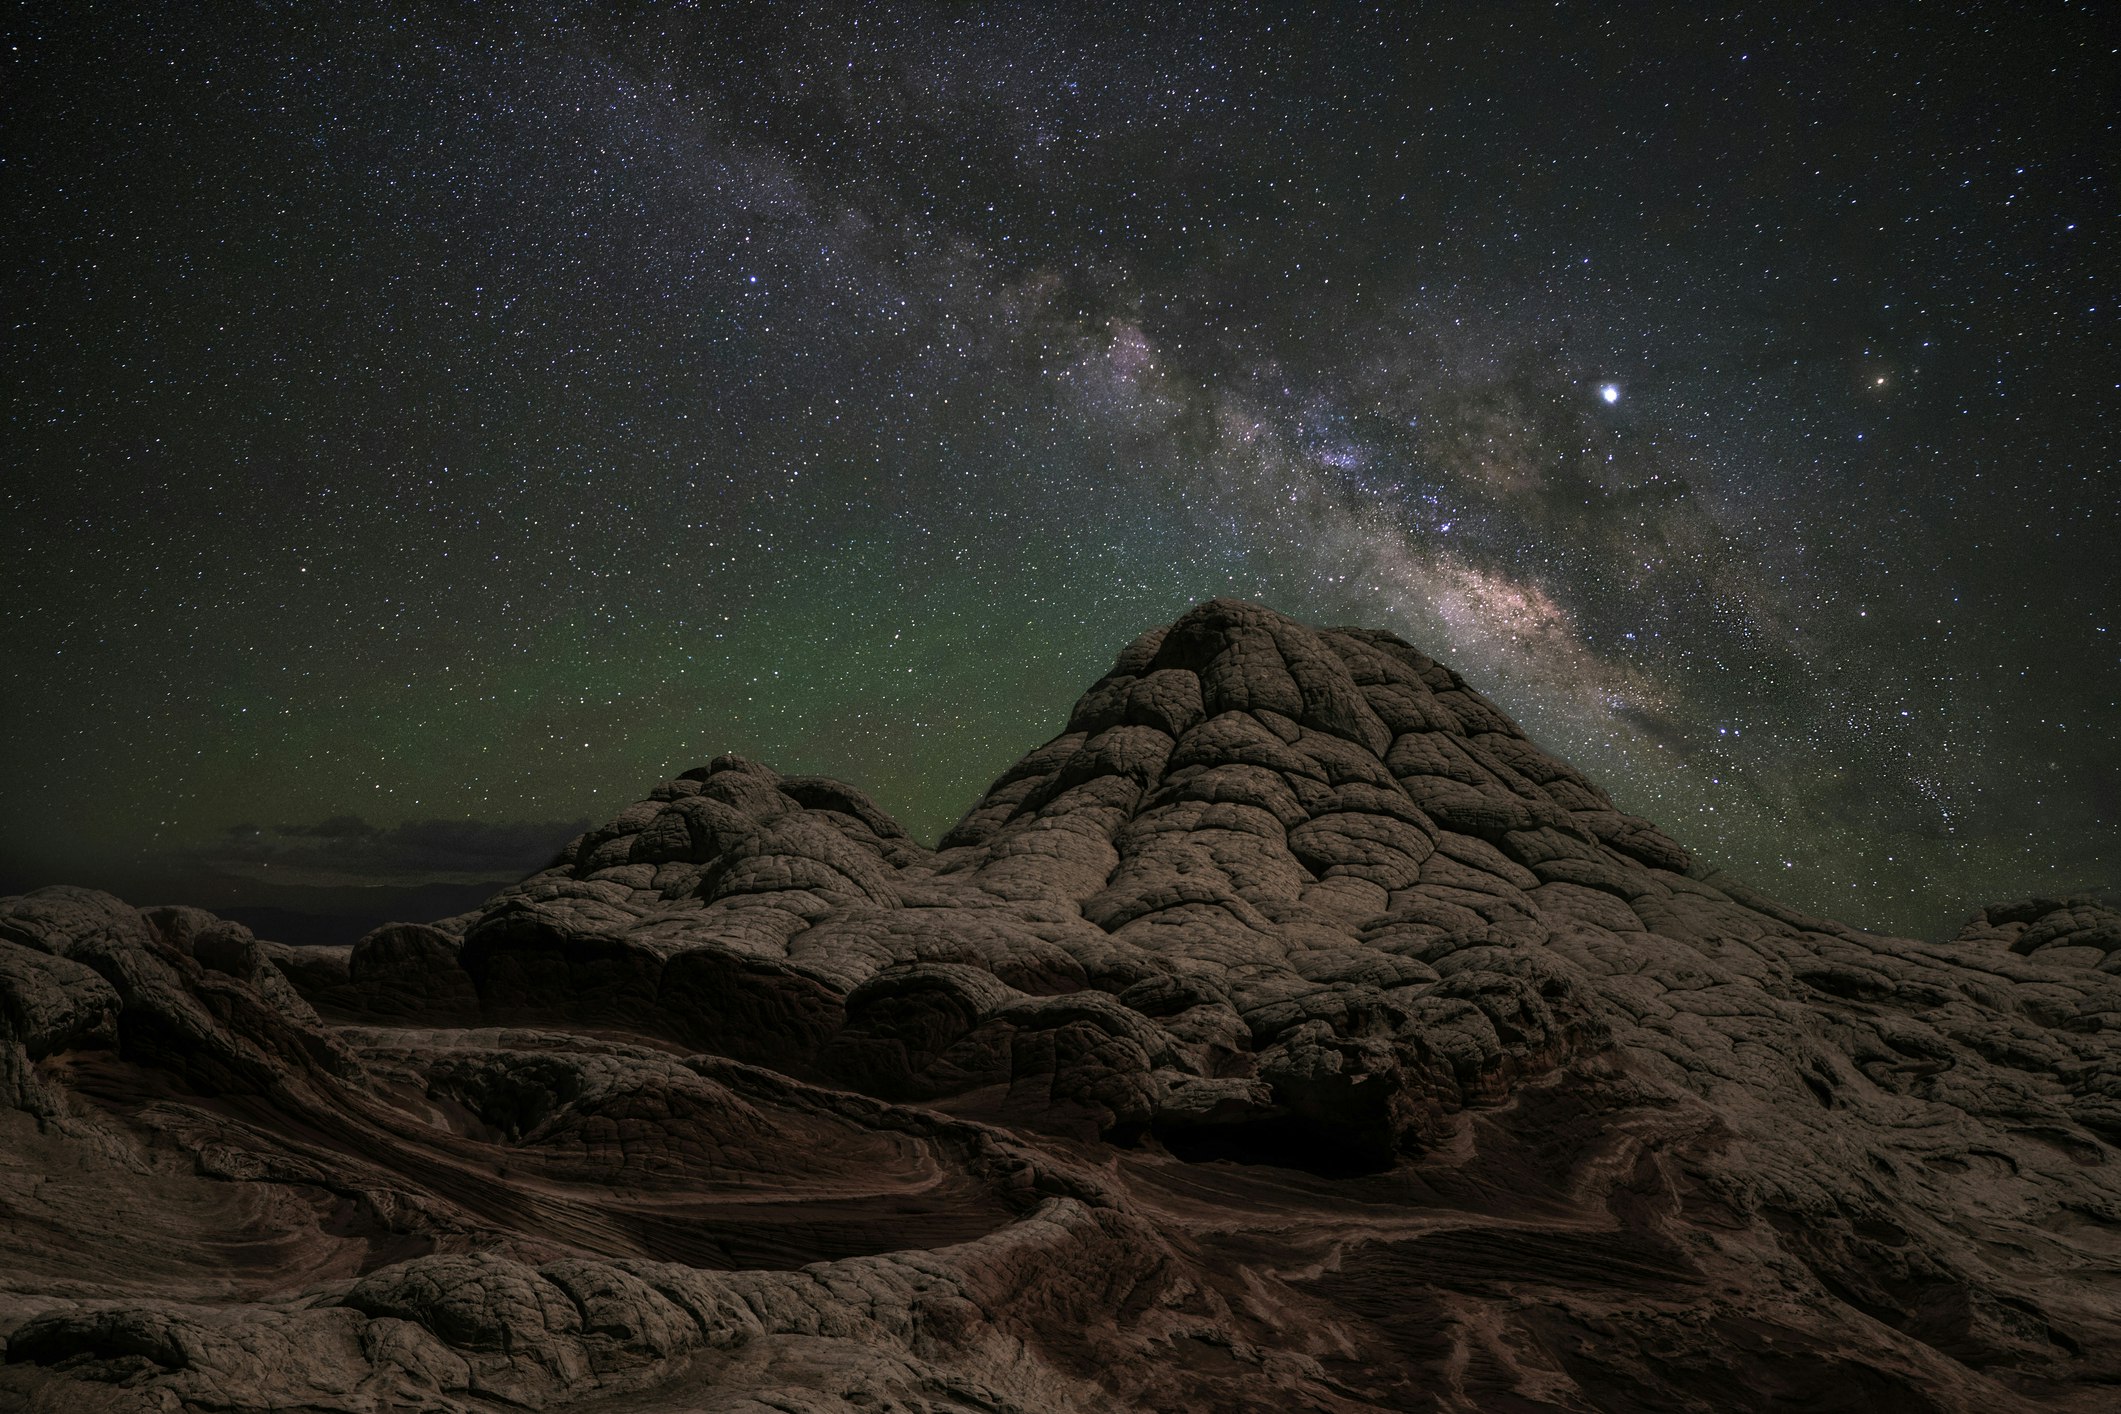 A night sky in shades of blue, green, and purple with a long streak of the Milky Way extending from the top center of the frame to the bottom right hangs over a large sandstone outcropping with whorls and bubbly lumps that form two conical mounds in the center of the shot